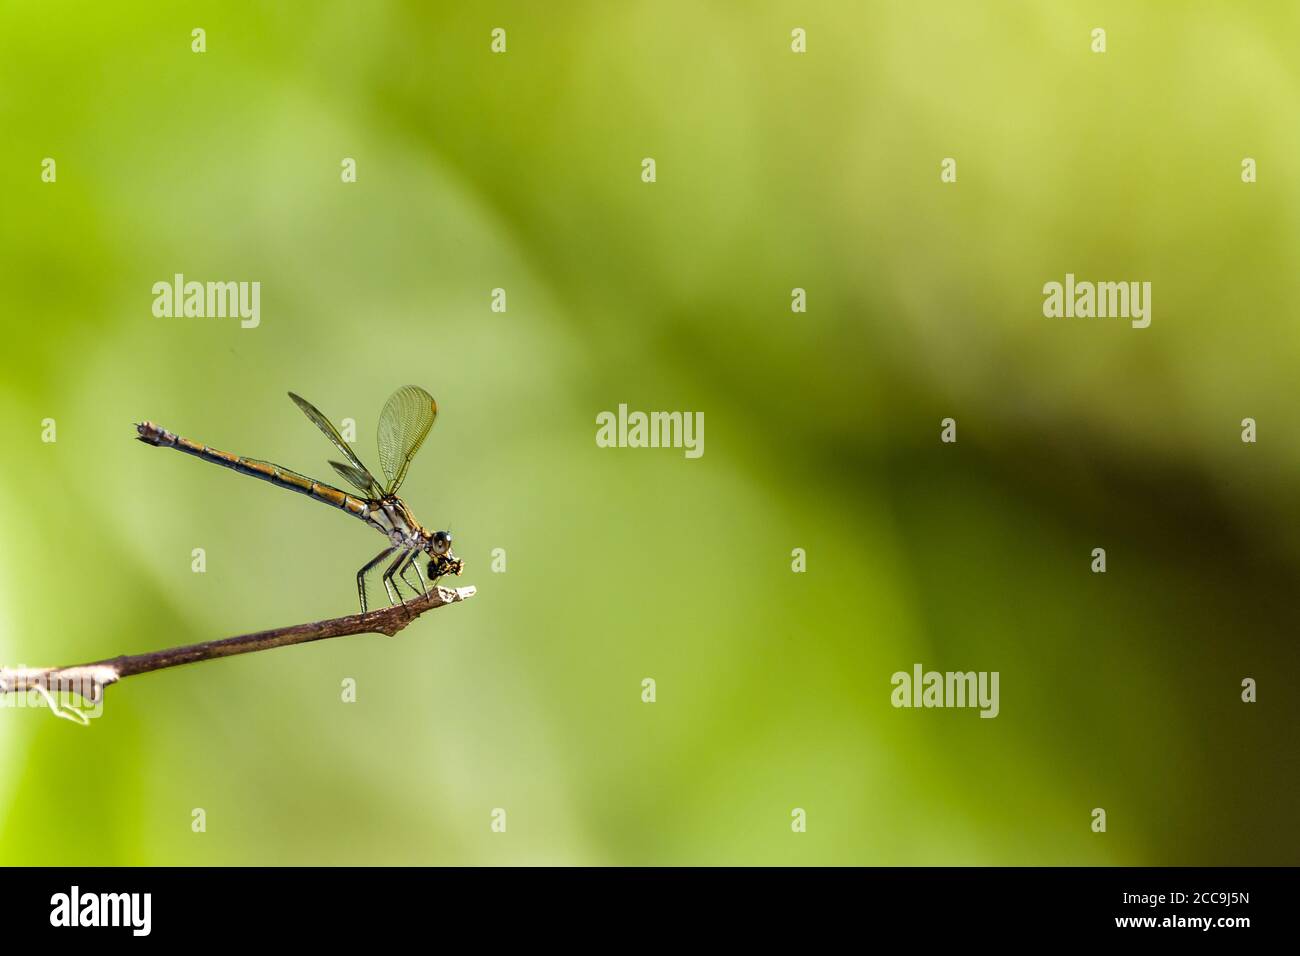 A close-up, of a feeding brown dragonfly resting on a twig with an out of focus green vegetation in the background in Cairns, Queensland in Australia. Stock Photo